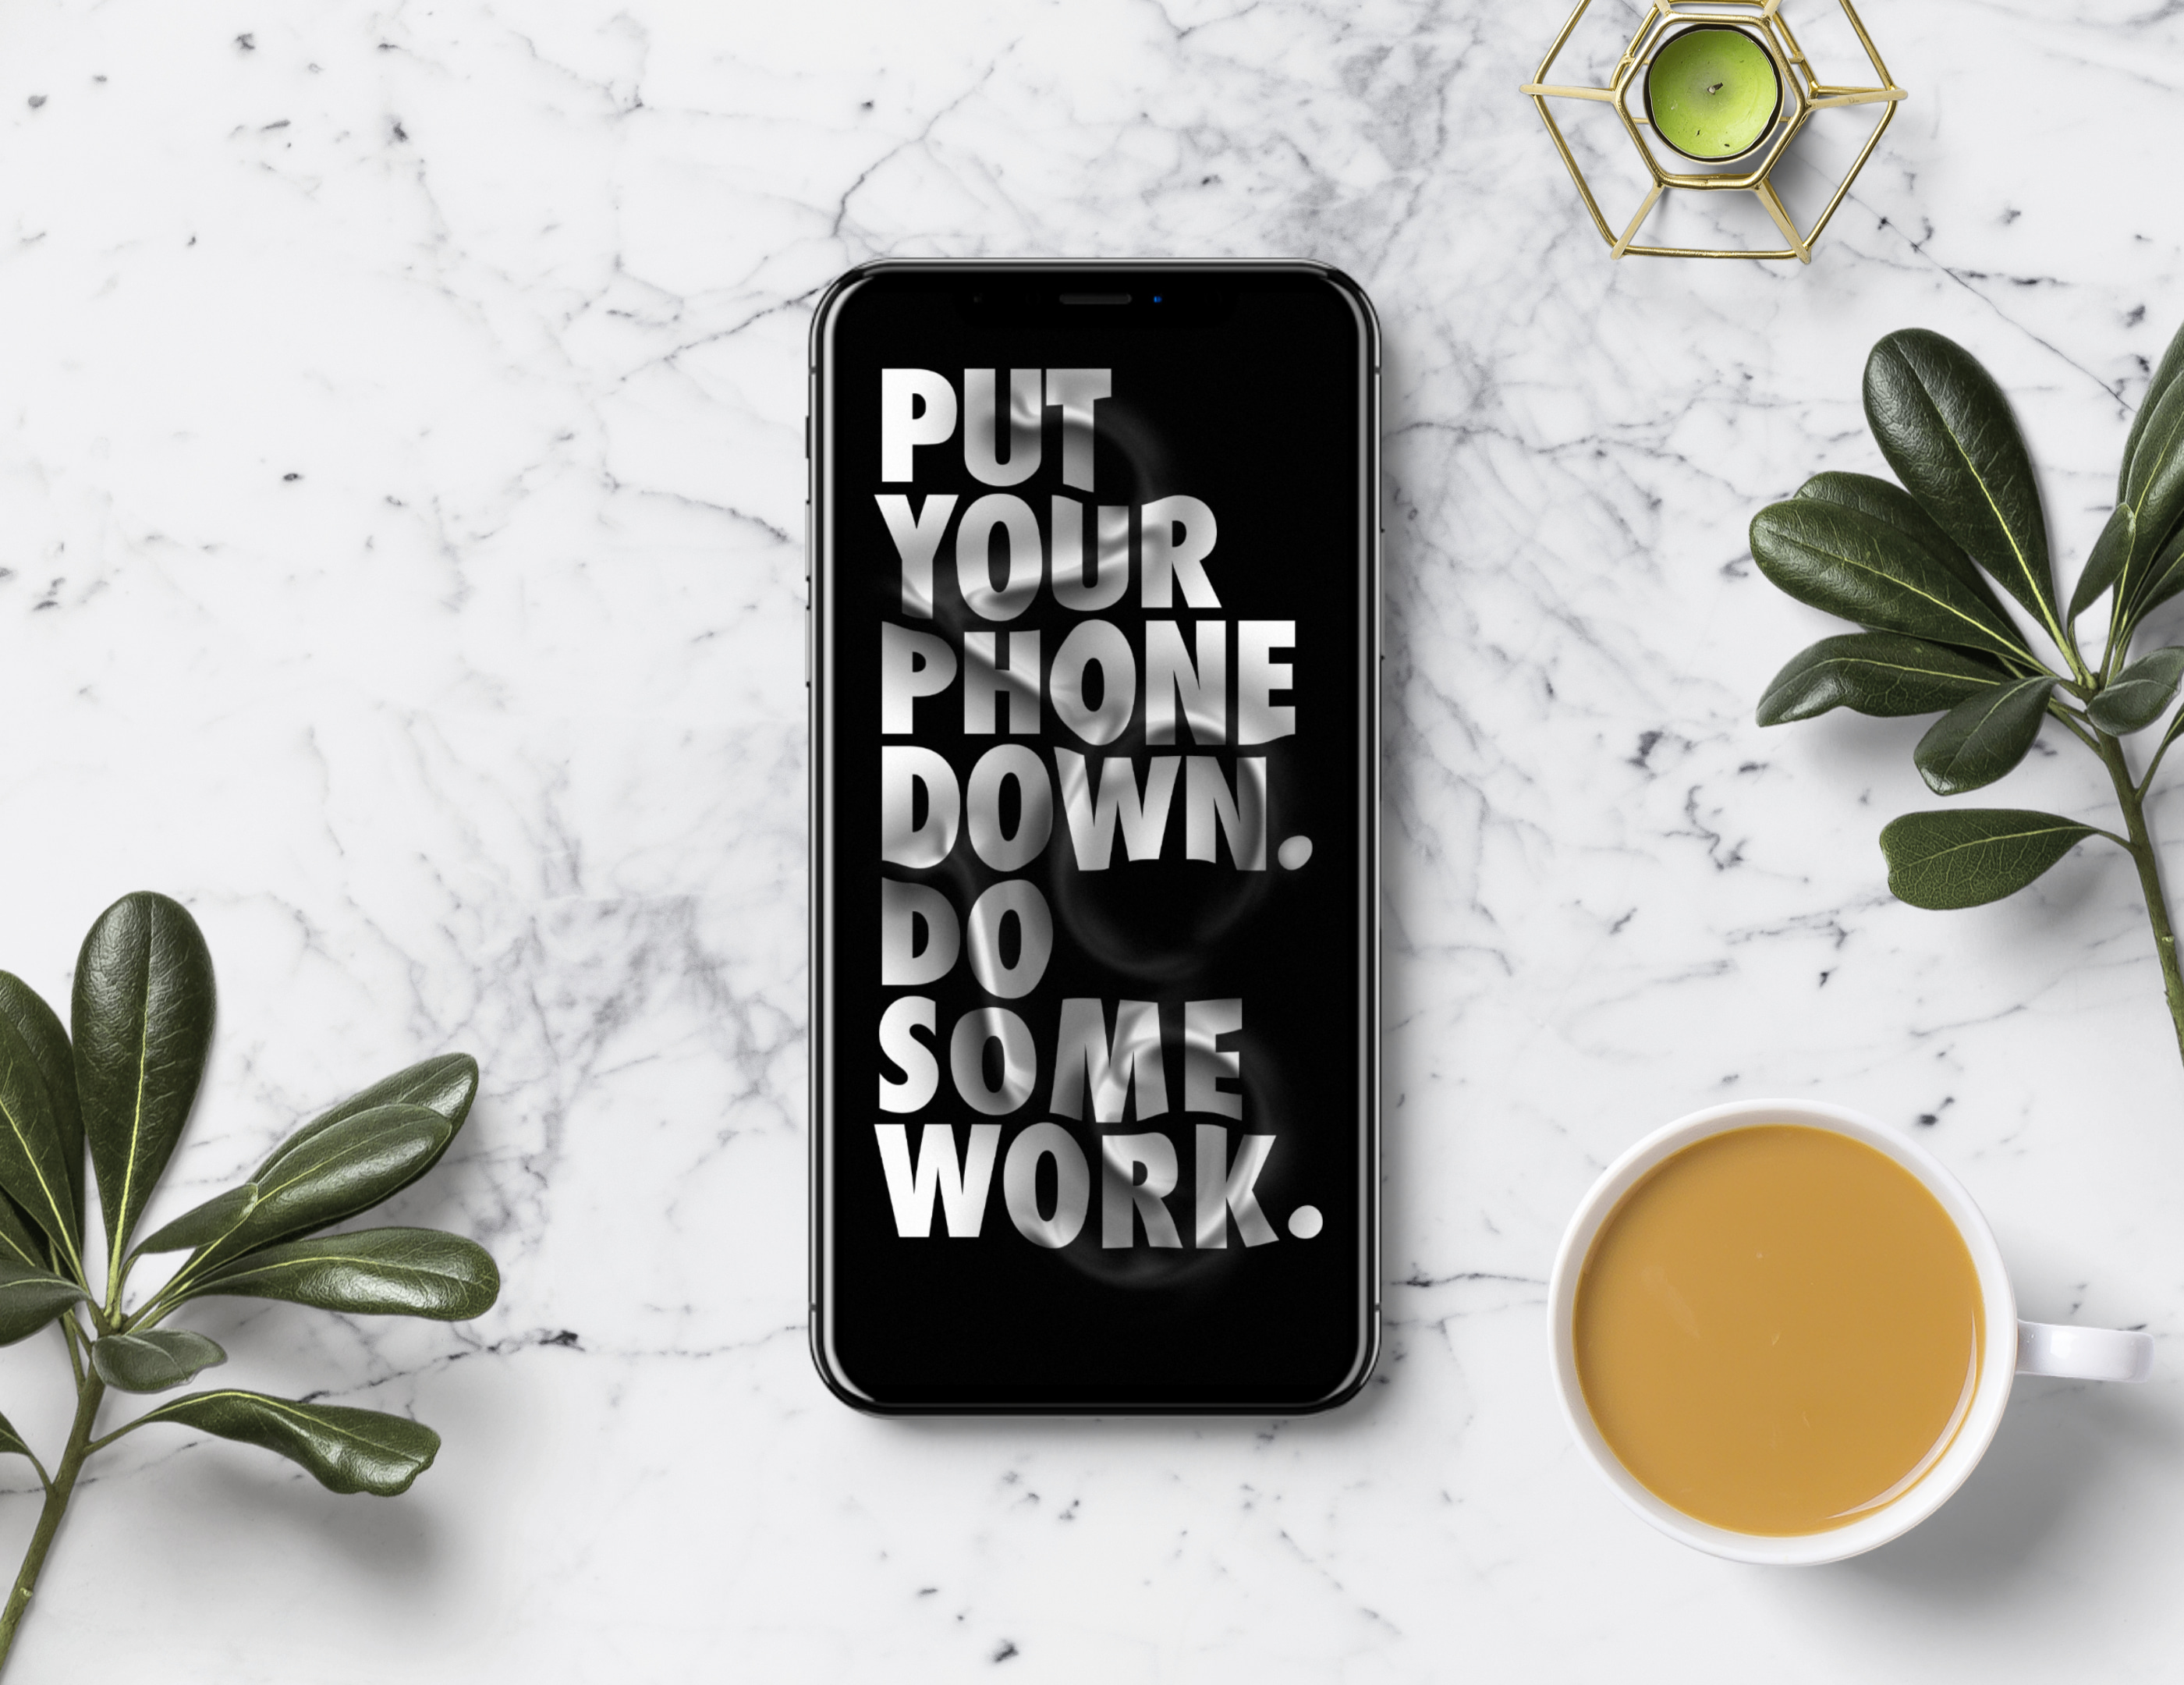 Lovely Wallpapers By Jordan Metcalf For 21wallpaper - Put Your Phone Down & Work - HD Wallpaper 